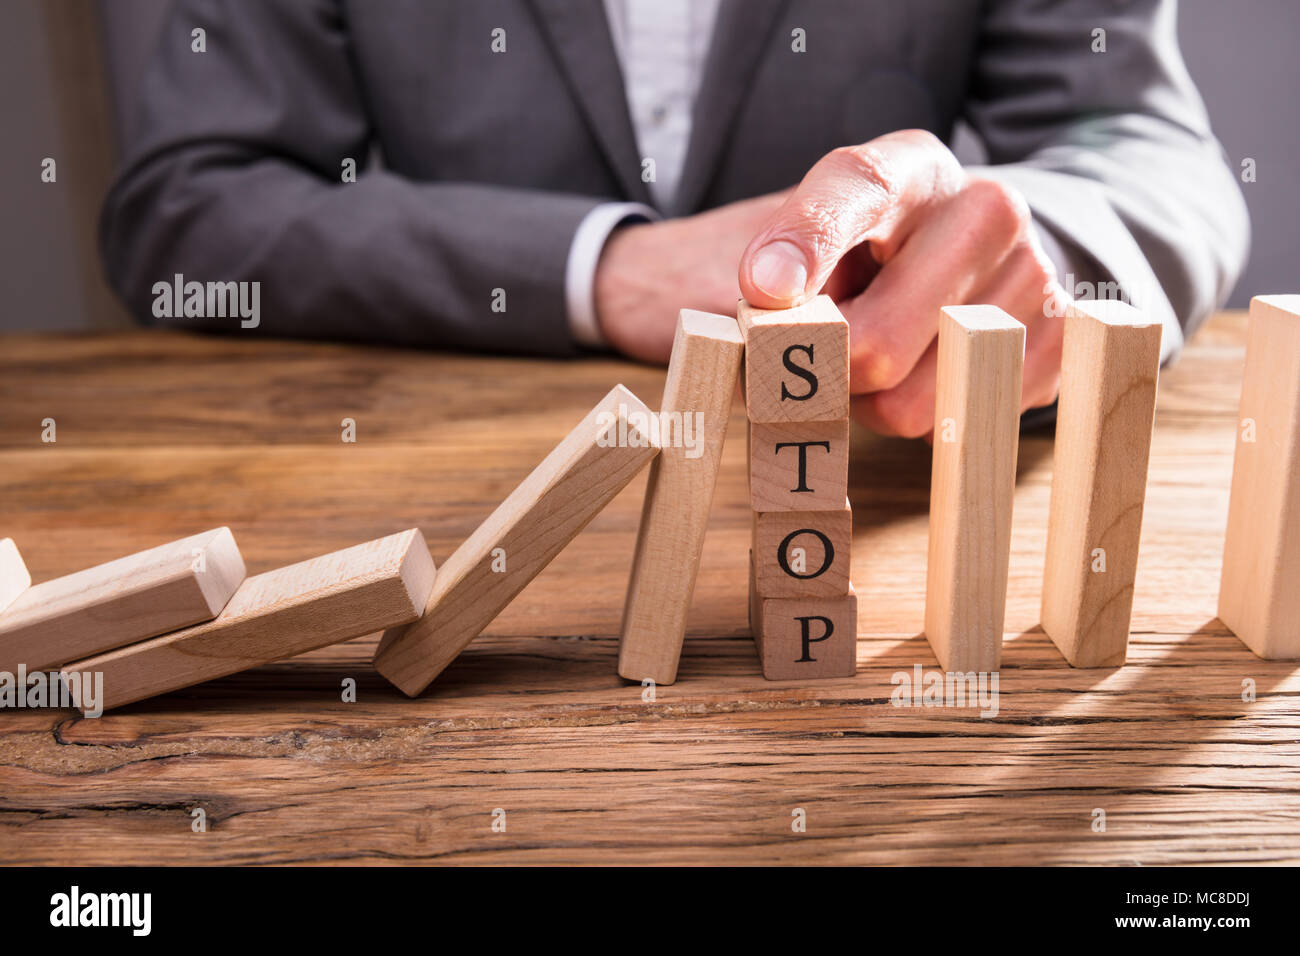 Businessperson's Finger Over Wooden Blocks With Stop Text Stopping Falling Dominos On Wooden Desk Stock Photo